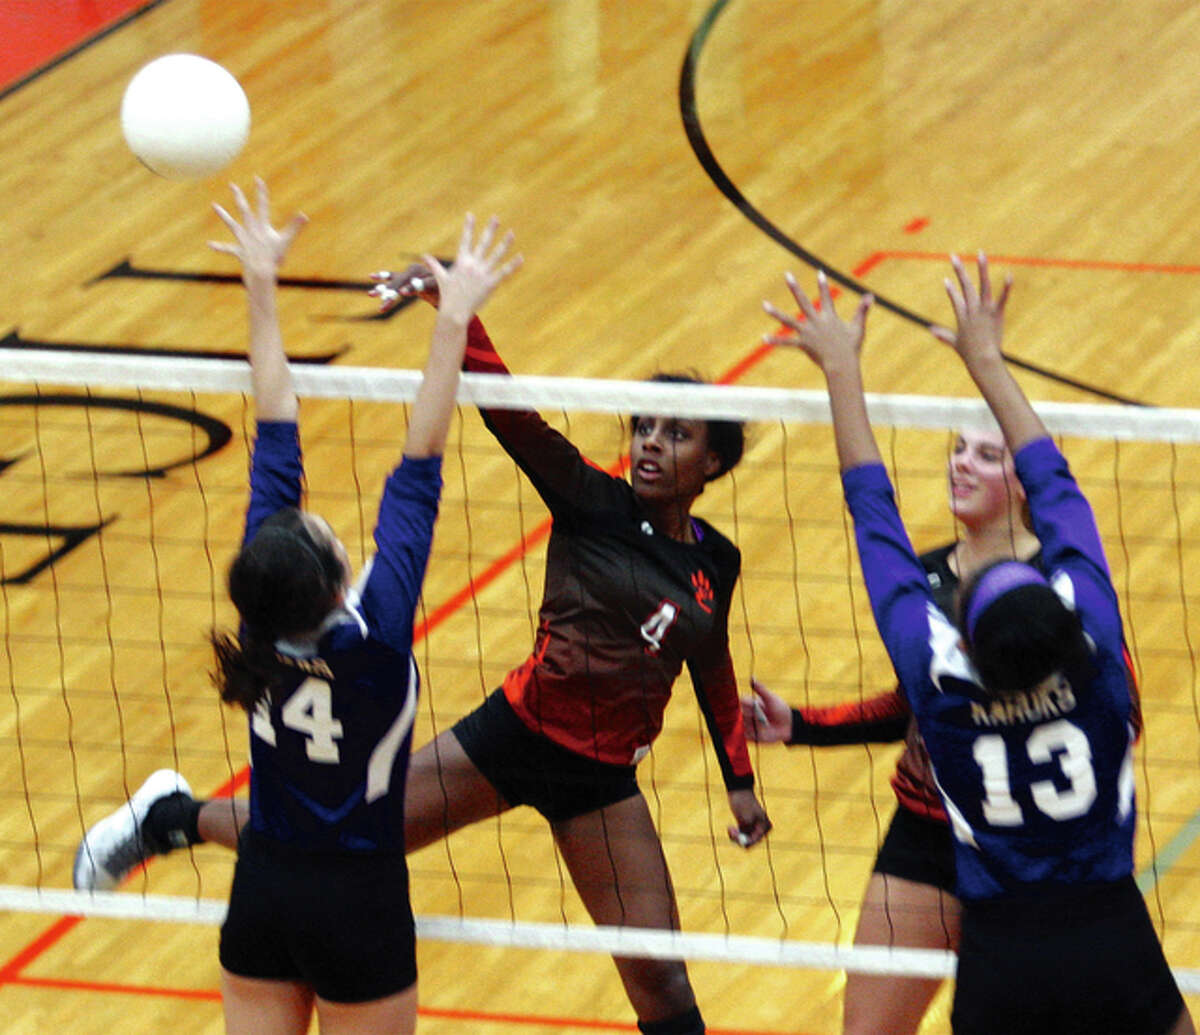 Edwardsville senior Sydney Wright (middle) sends the ball past the block of Collinsville’s Ellie McCarthy (left) and Ayona Tharps (13) in the Tigers’ SWC volleyball victory Thursday at Lucco-Jackson Gym in Edwardsville.